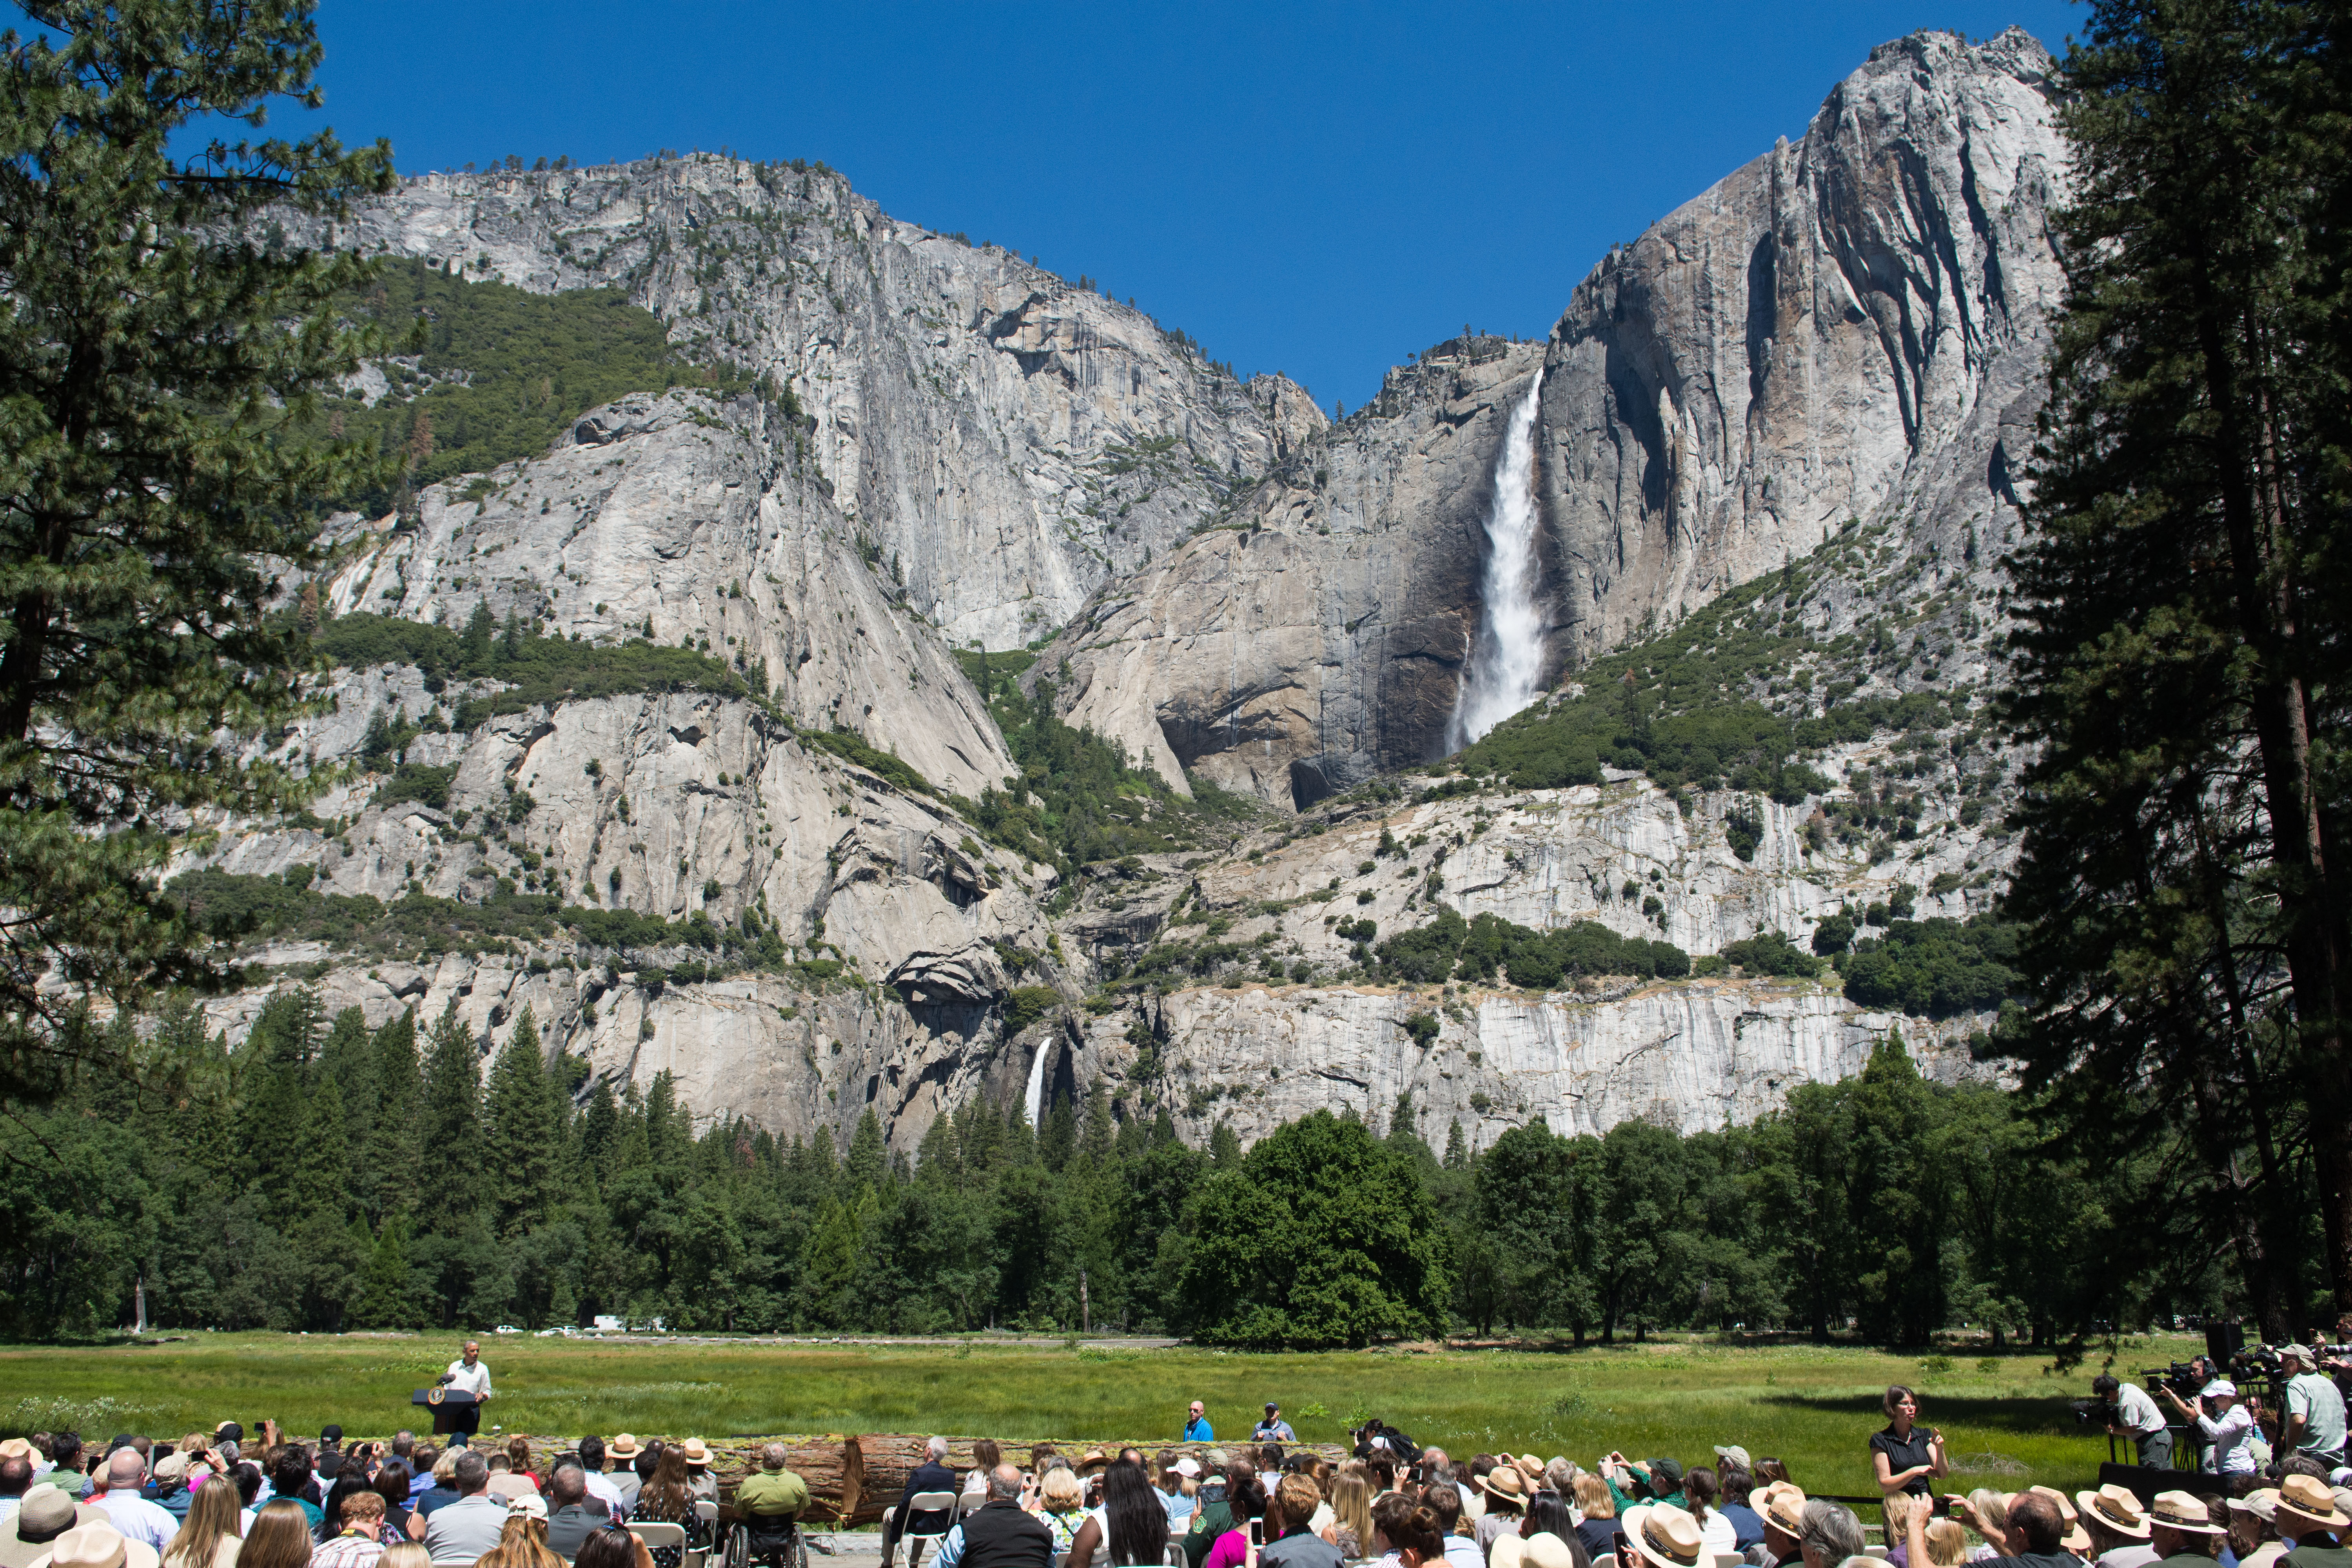 President Obama Speaks At Yosemite National Park Marking 100th Anniversary Of The Creation Of America's National Park System